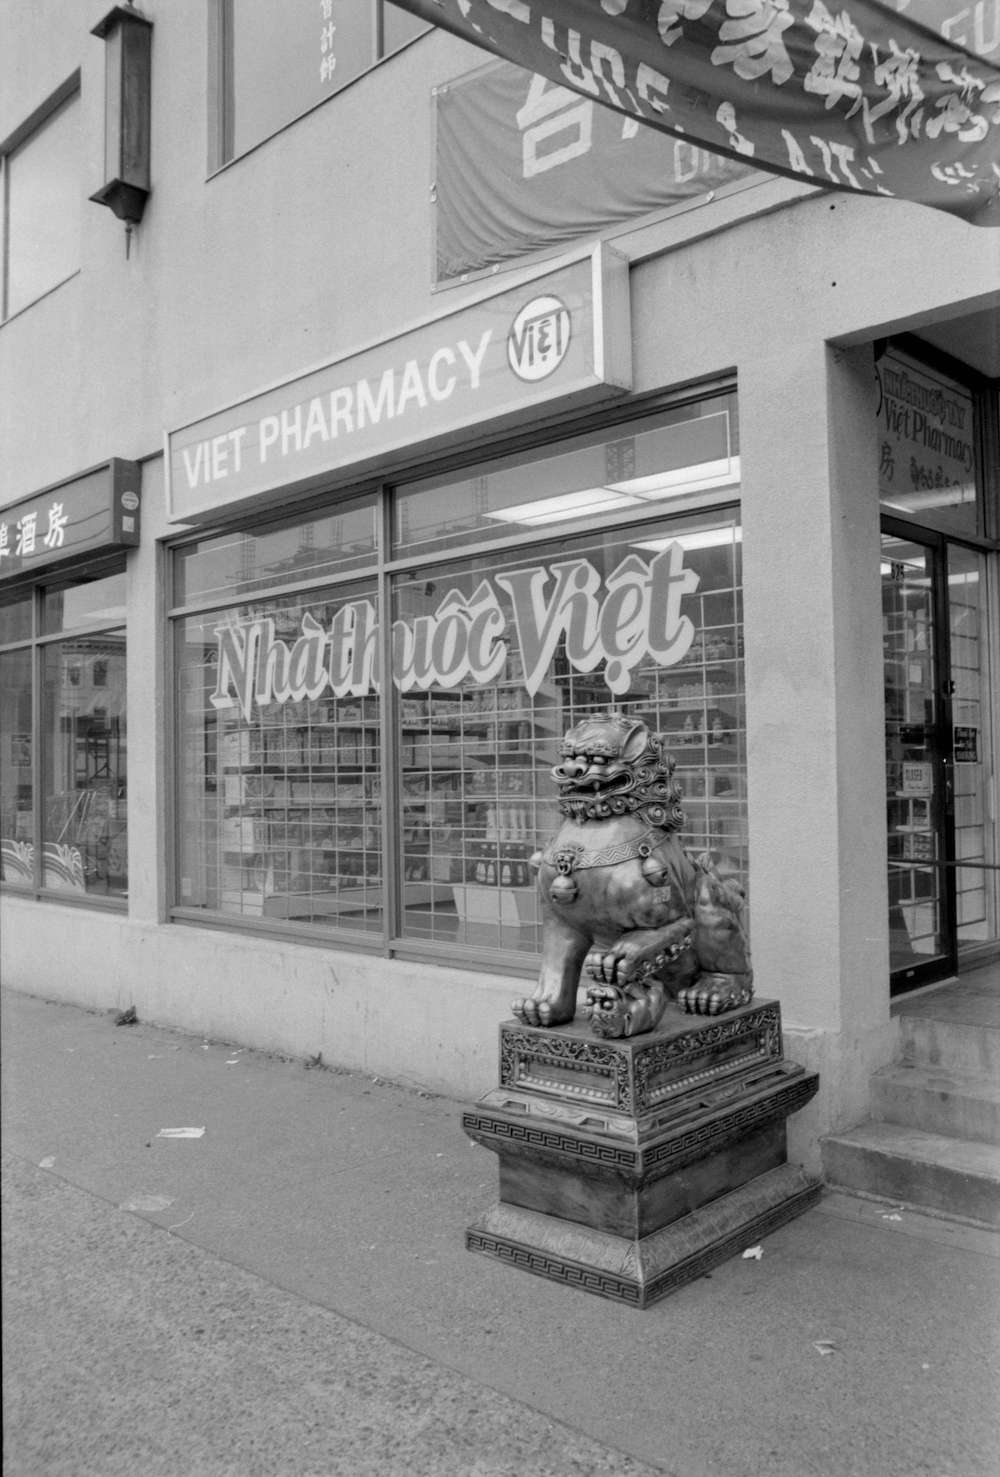 1986-Storefront of a Viet Pharmacy, a new business in Vancouver Chinatown